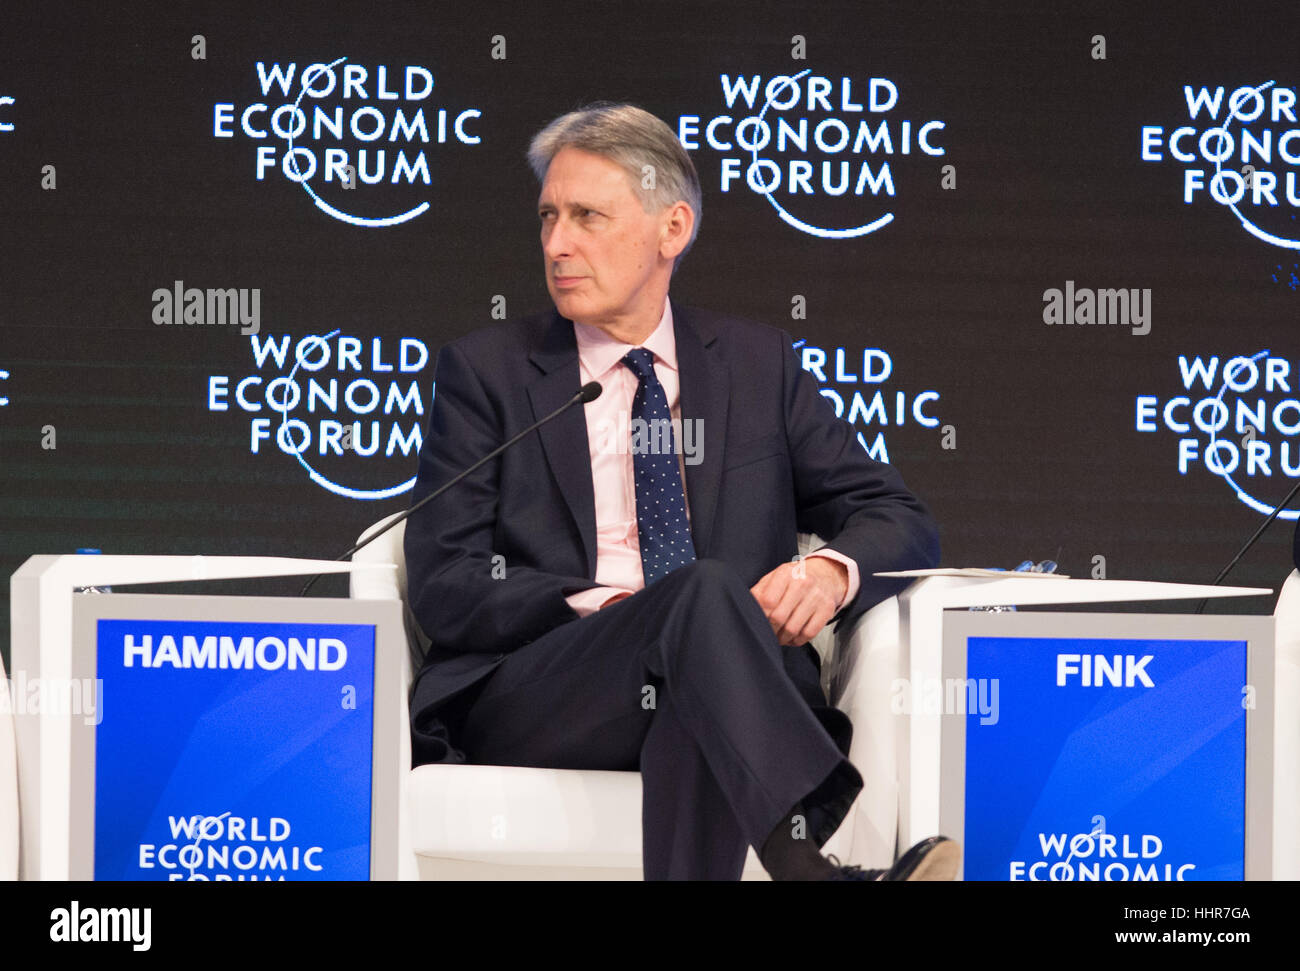 (1701020) -- DAVOS, Jan. 20, 2017 (Xinhua) -- Philip Hammond, the United Kingdom's Chancellor of the Exchequer, attends the annual meeting of the World Economic Forum (WEF) in Davos, Switzerland, Jan. 20, 2017.(Xinhua/Xu Jinquan)(gl) Stock Photo